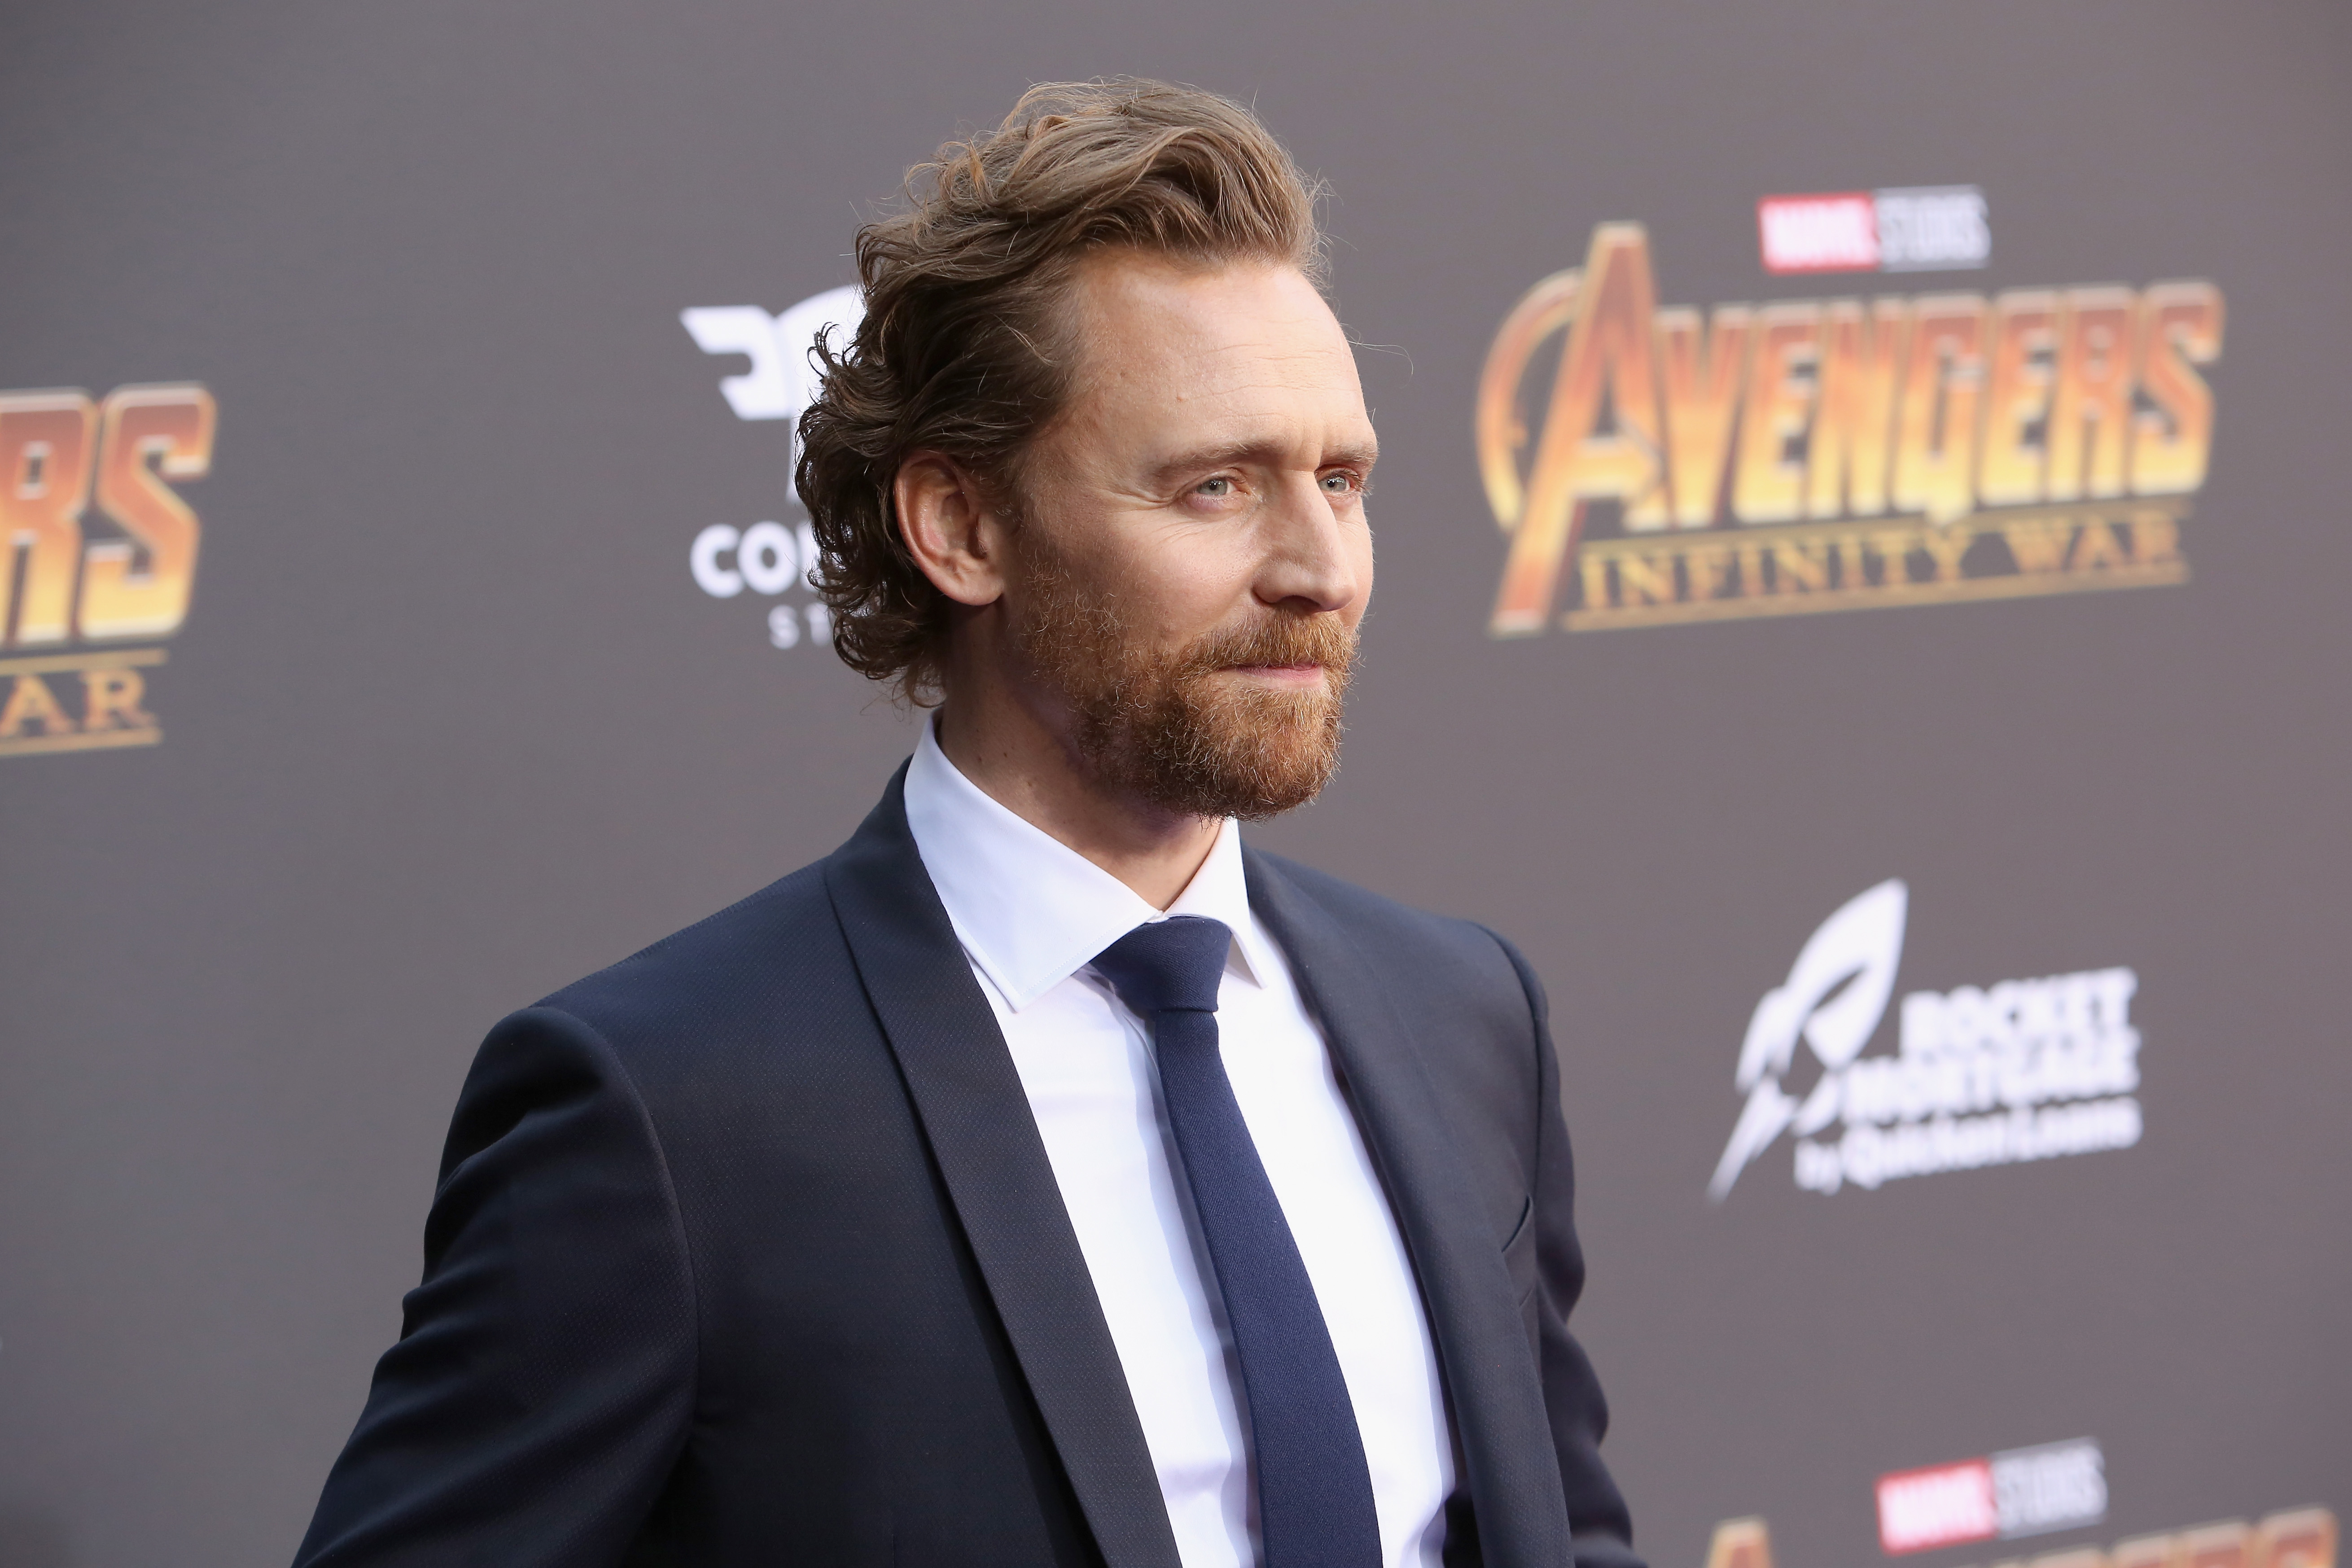 Tom Hiddleston, who might appear in 'Thor: Love and Thunder' as Loki, wears a black suit over a white button-up shirt and black tie.